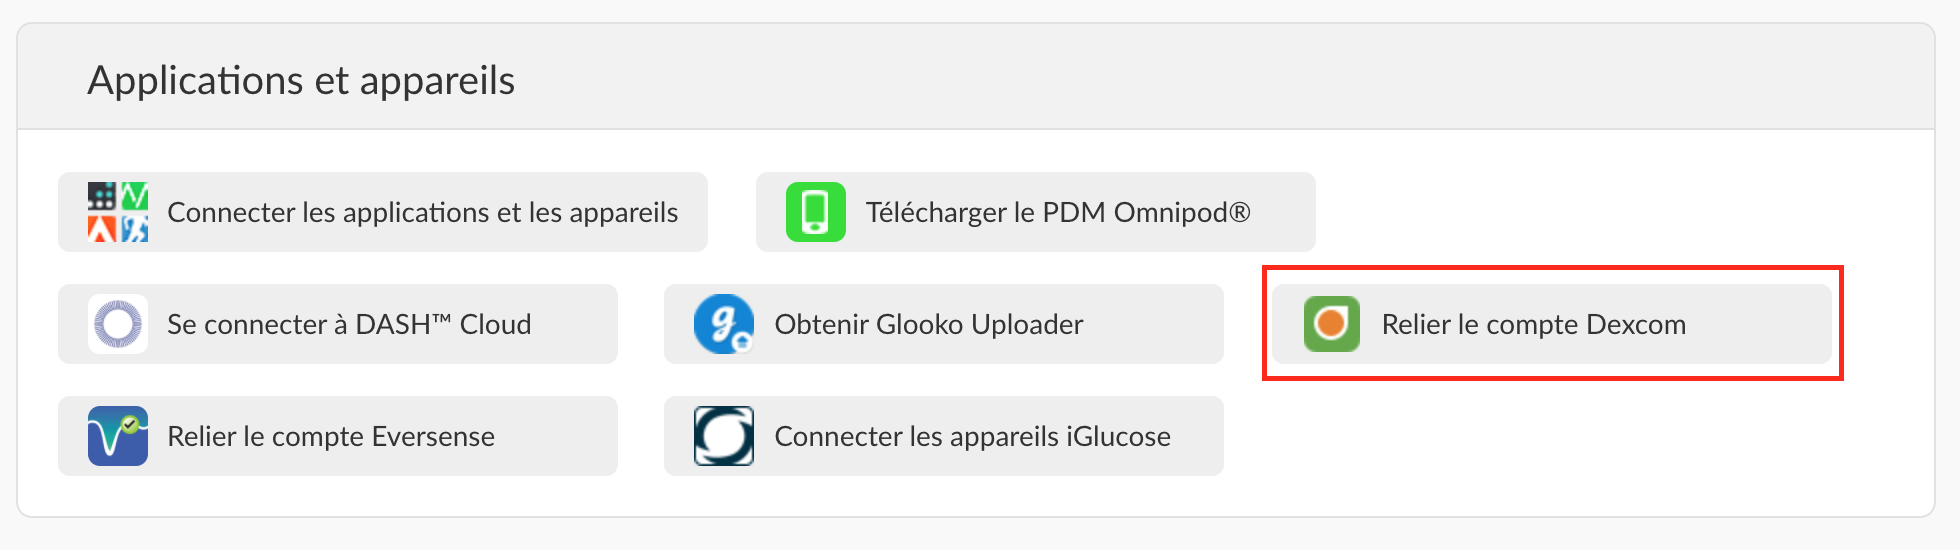 french-web-appsanddevices-connectdexcom.png